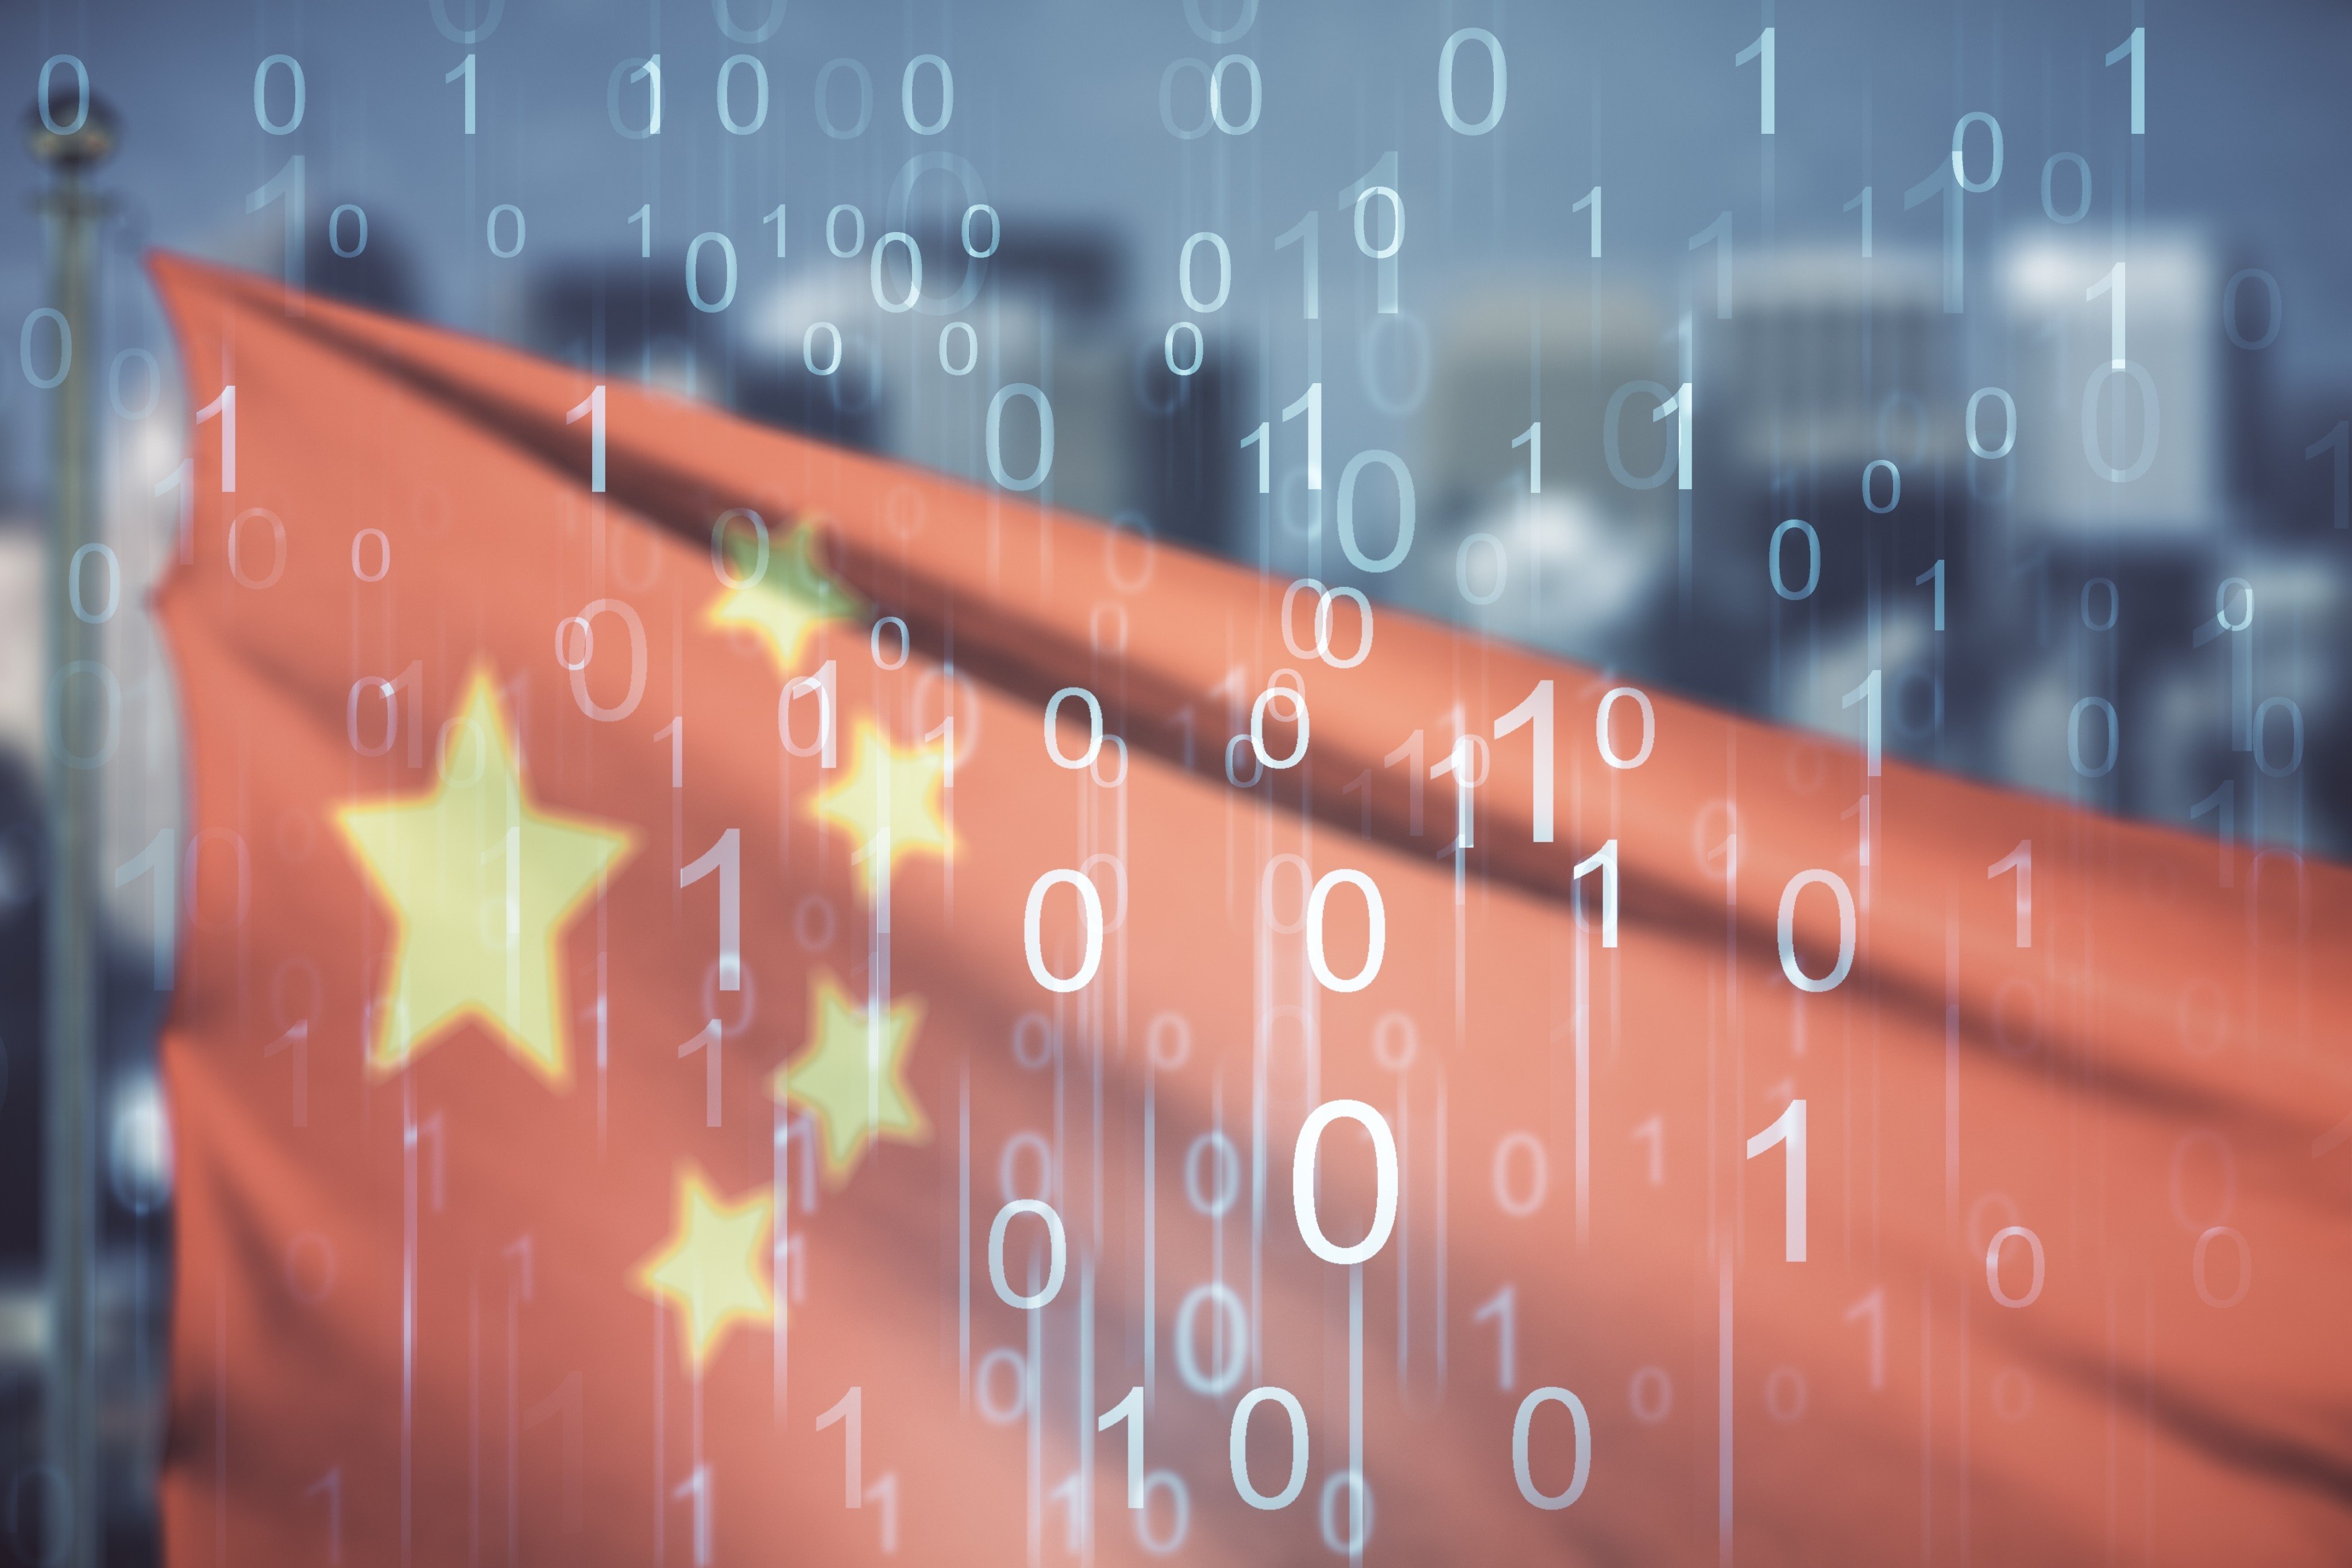 A Chinese government survey finds that the country’s data generation and storage conversion ratio remains low, although it is a worldwide issue. Photo: Shutterstock